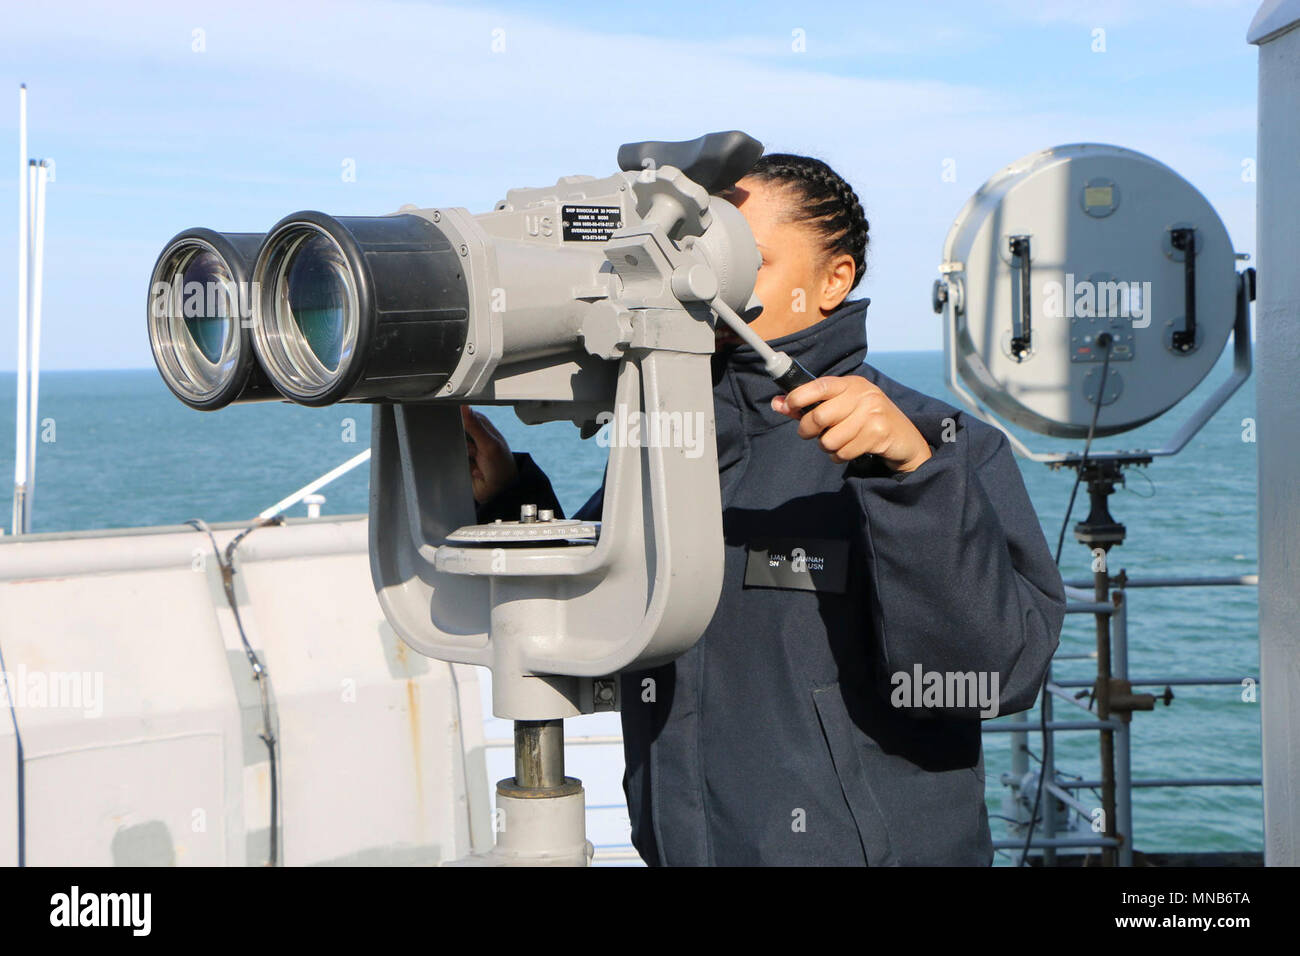 ATLANTIC OCEAN (Mar. 15, 2018) Seaman Hannah Ijah scans the horizon for other ships while standing watch as the forward lookout aboard amphibious dock landing ship USS Gunston Hall (LSD 44).  Gunston Hall is underway participating in Carrier Strike Group FOUR Task Force Exercise in preparation for an upcoming deployment. (U.S. Navy Stock Photo